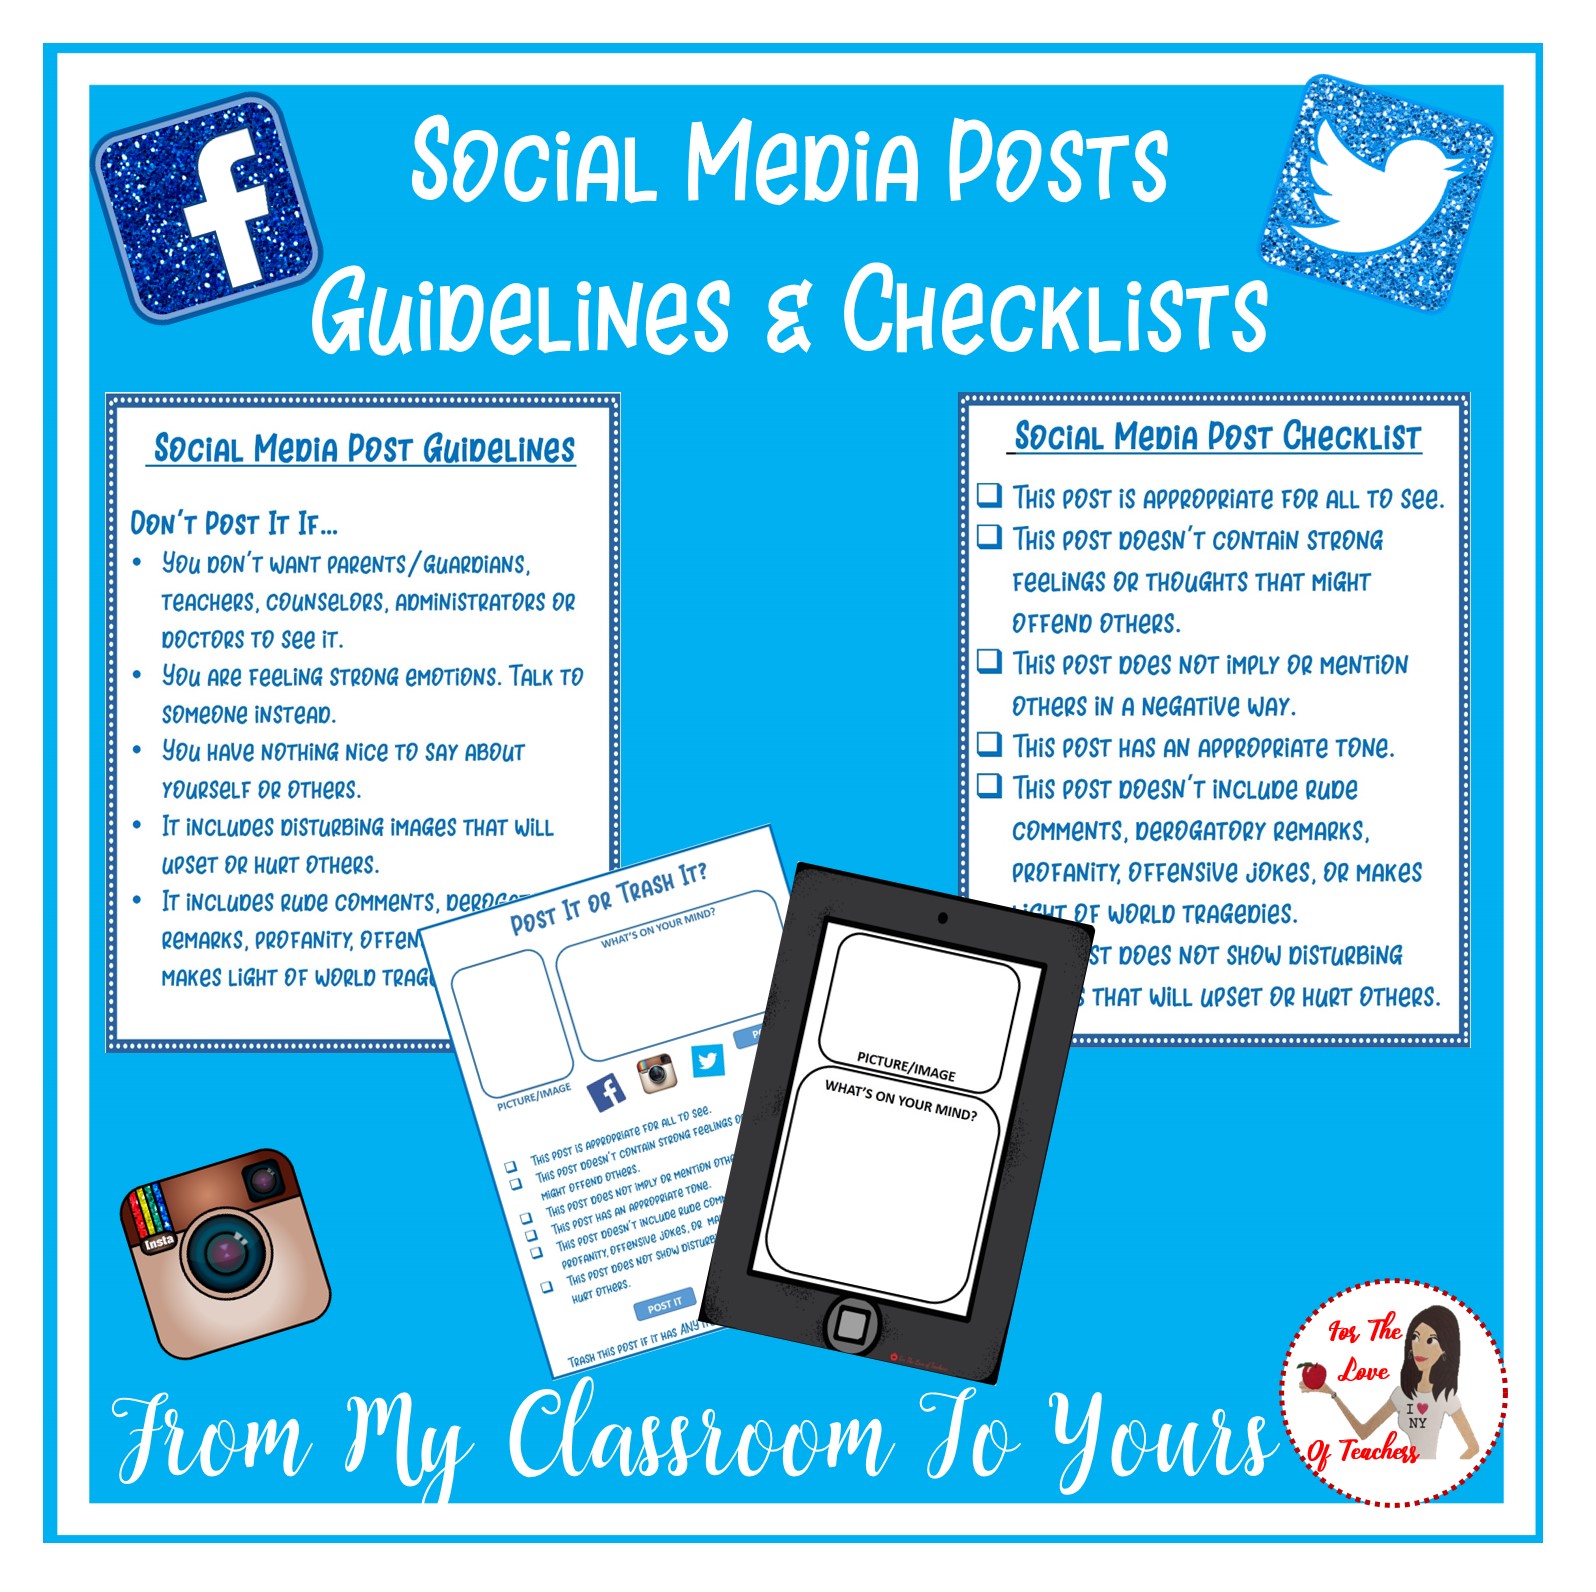 Teaching Kids How To Use Social Media Responsibly